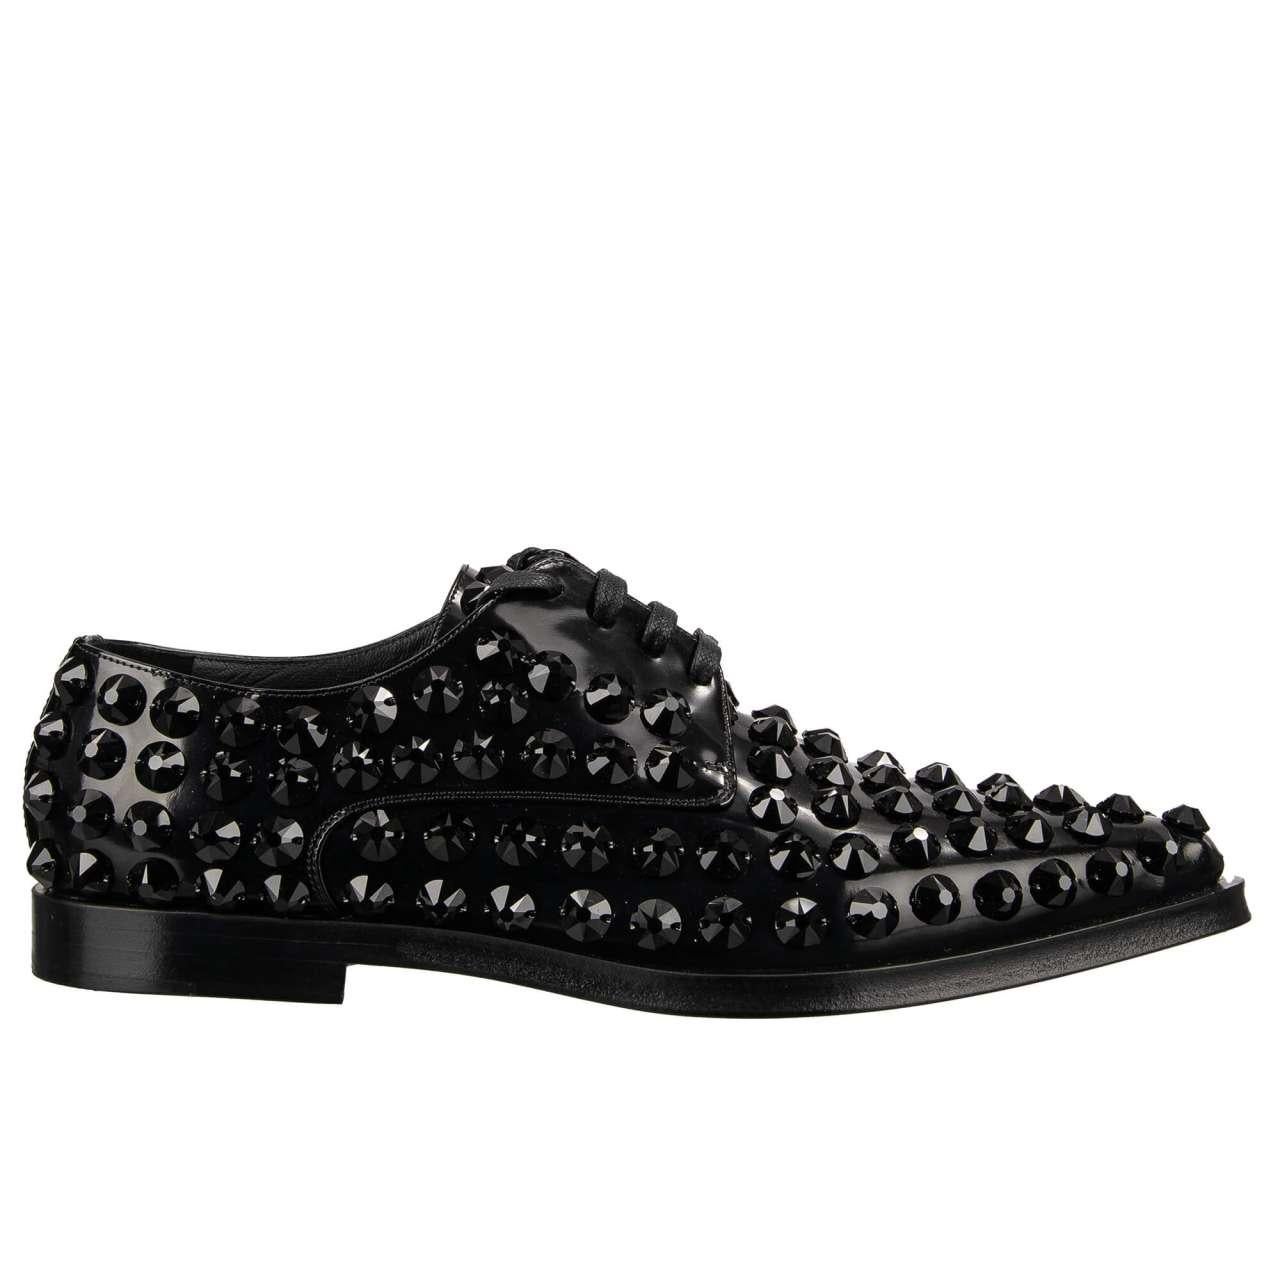 Dolce & Gabbana - Crystal Classic Leather Shoes MILLENIALS Black 40 US 10 In Excellent Condition For Sale In Erkrath, DE